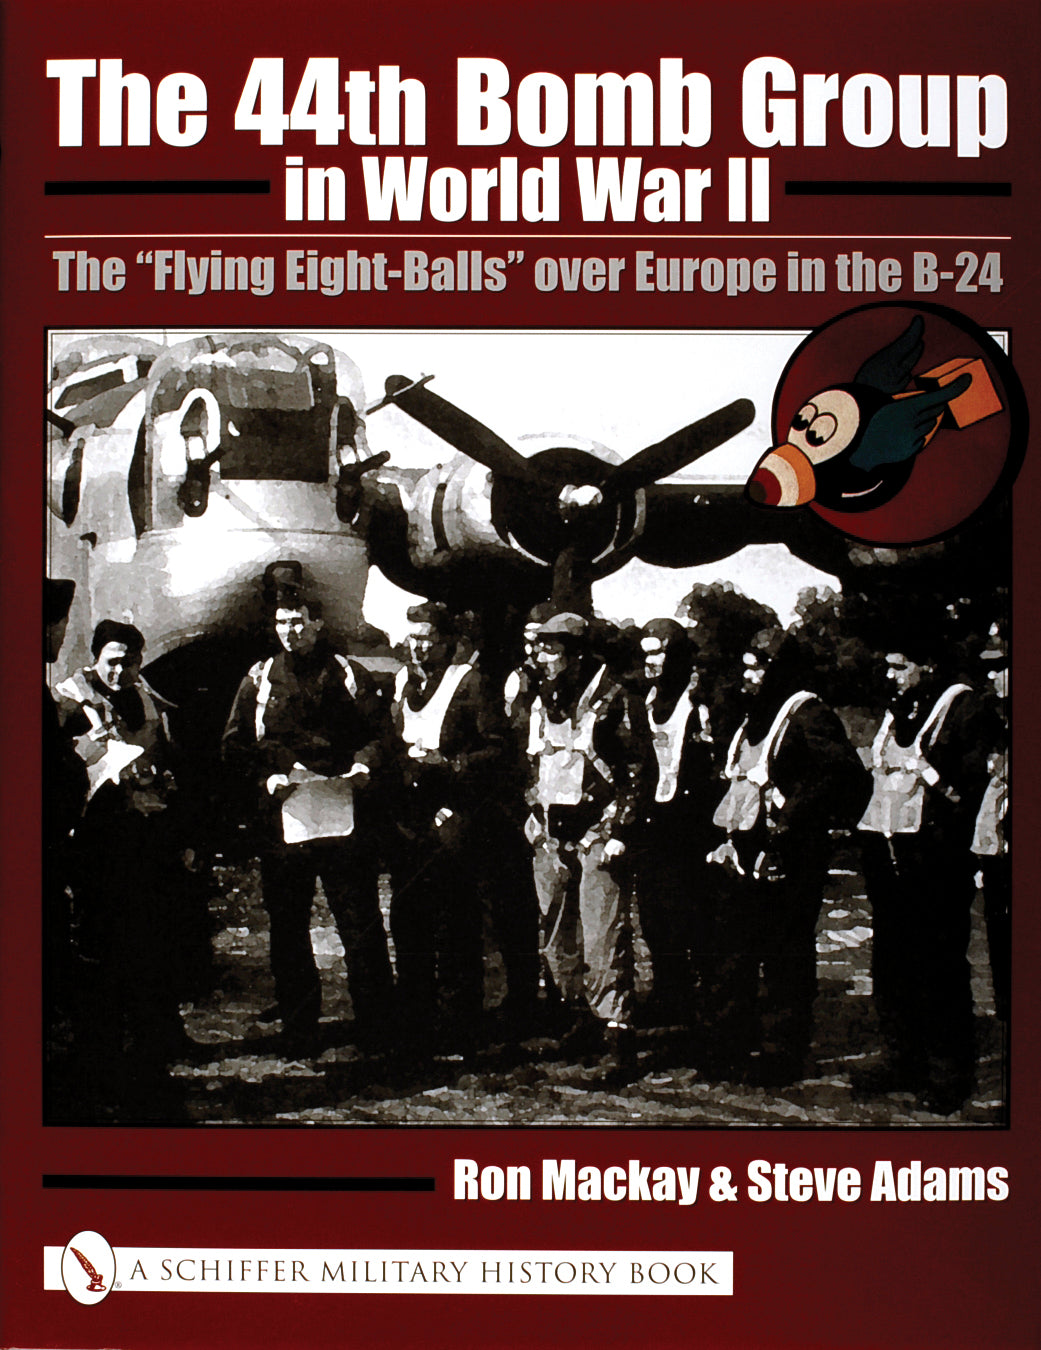 The 44th Bomb Group in World War II